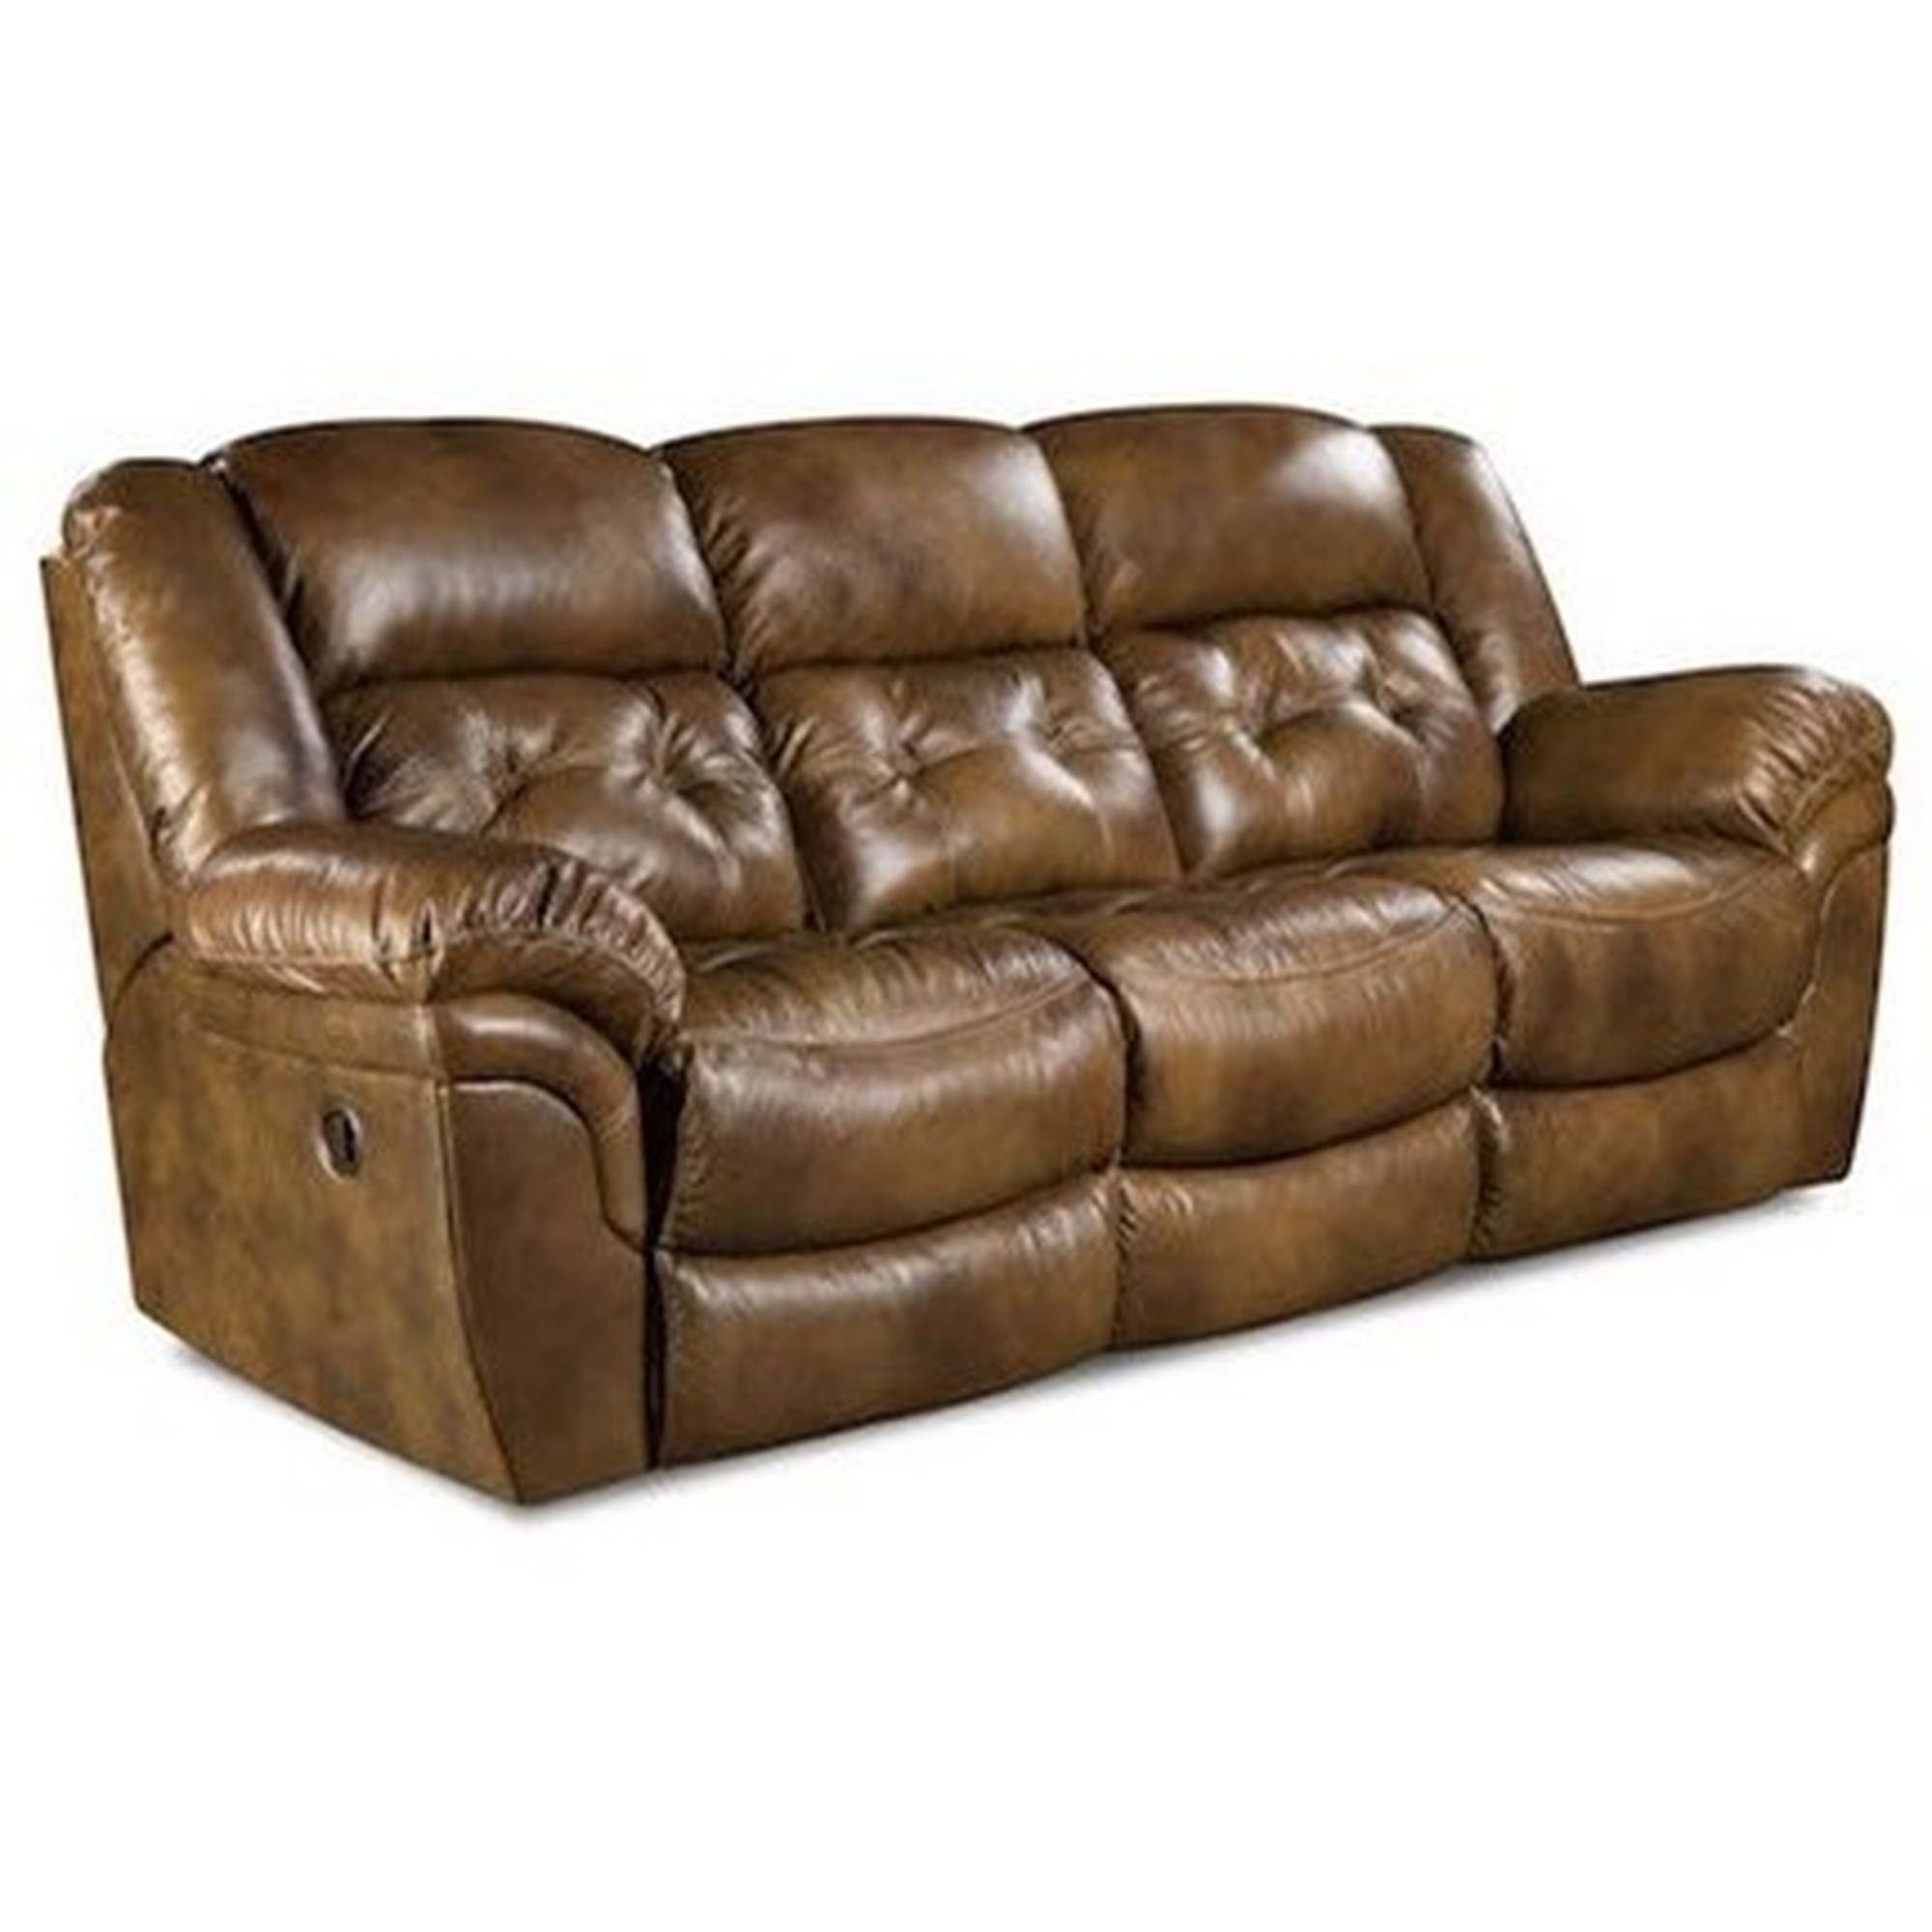 Couch Bed & Small Sofa With Foot Rest for Sale in Ontario, CA